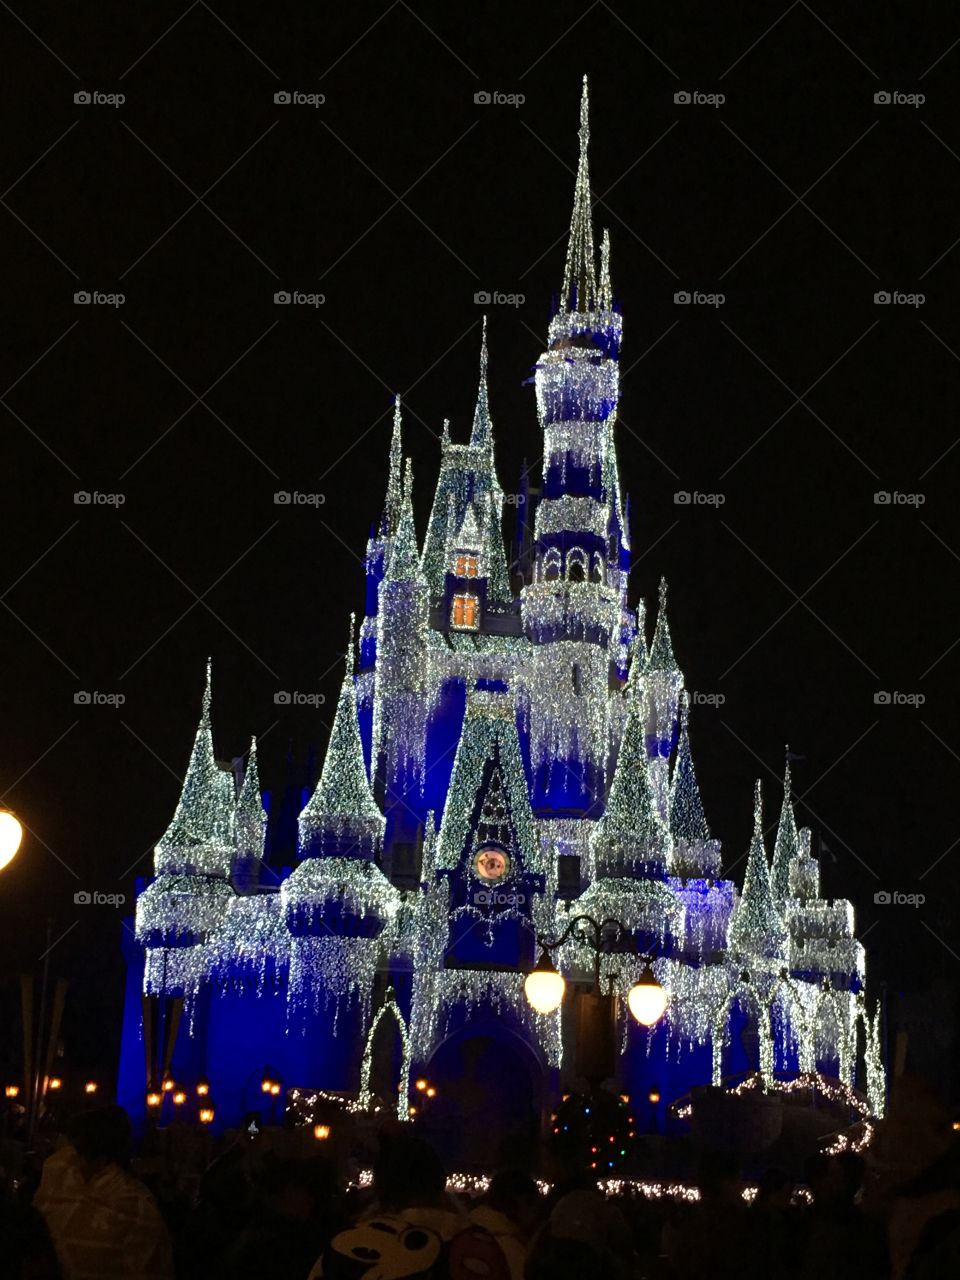 Cinderella Castle. Covered in icicle lights - Christmas 